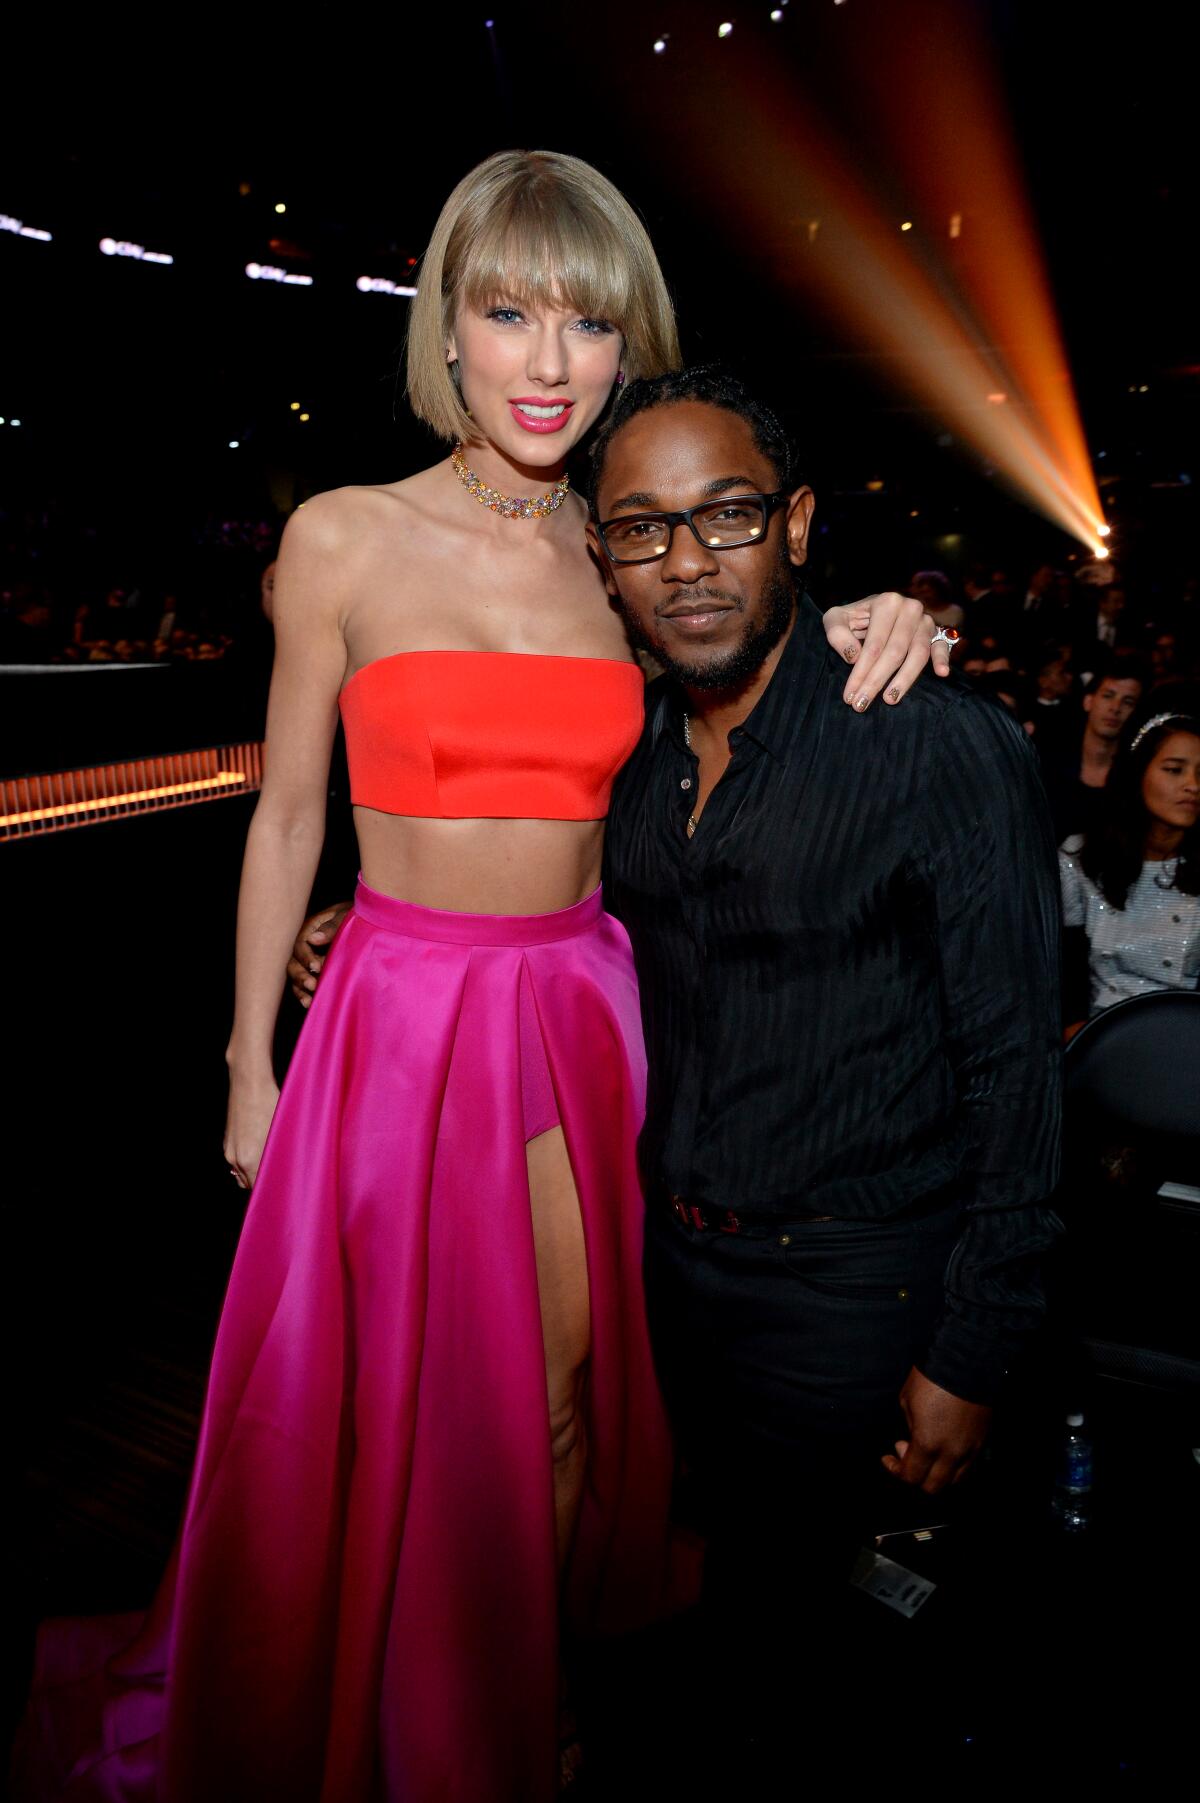 Taylor Swift in a neon orange top and hot pink skirt standing next to Kendrick Lamar in glasses and a black outfit